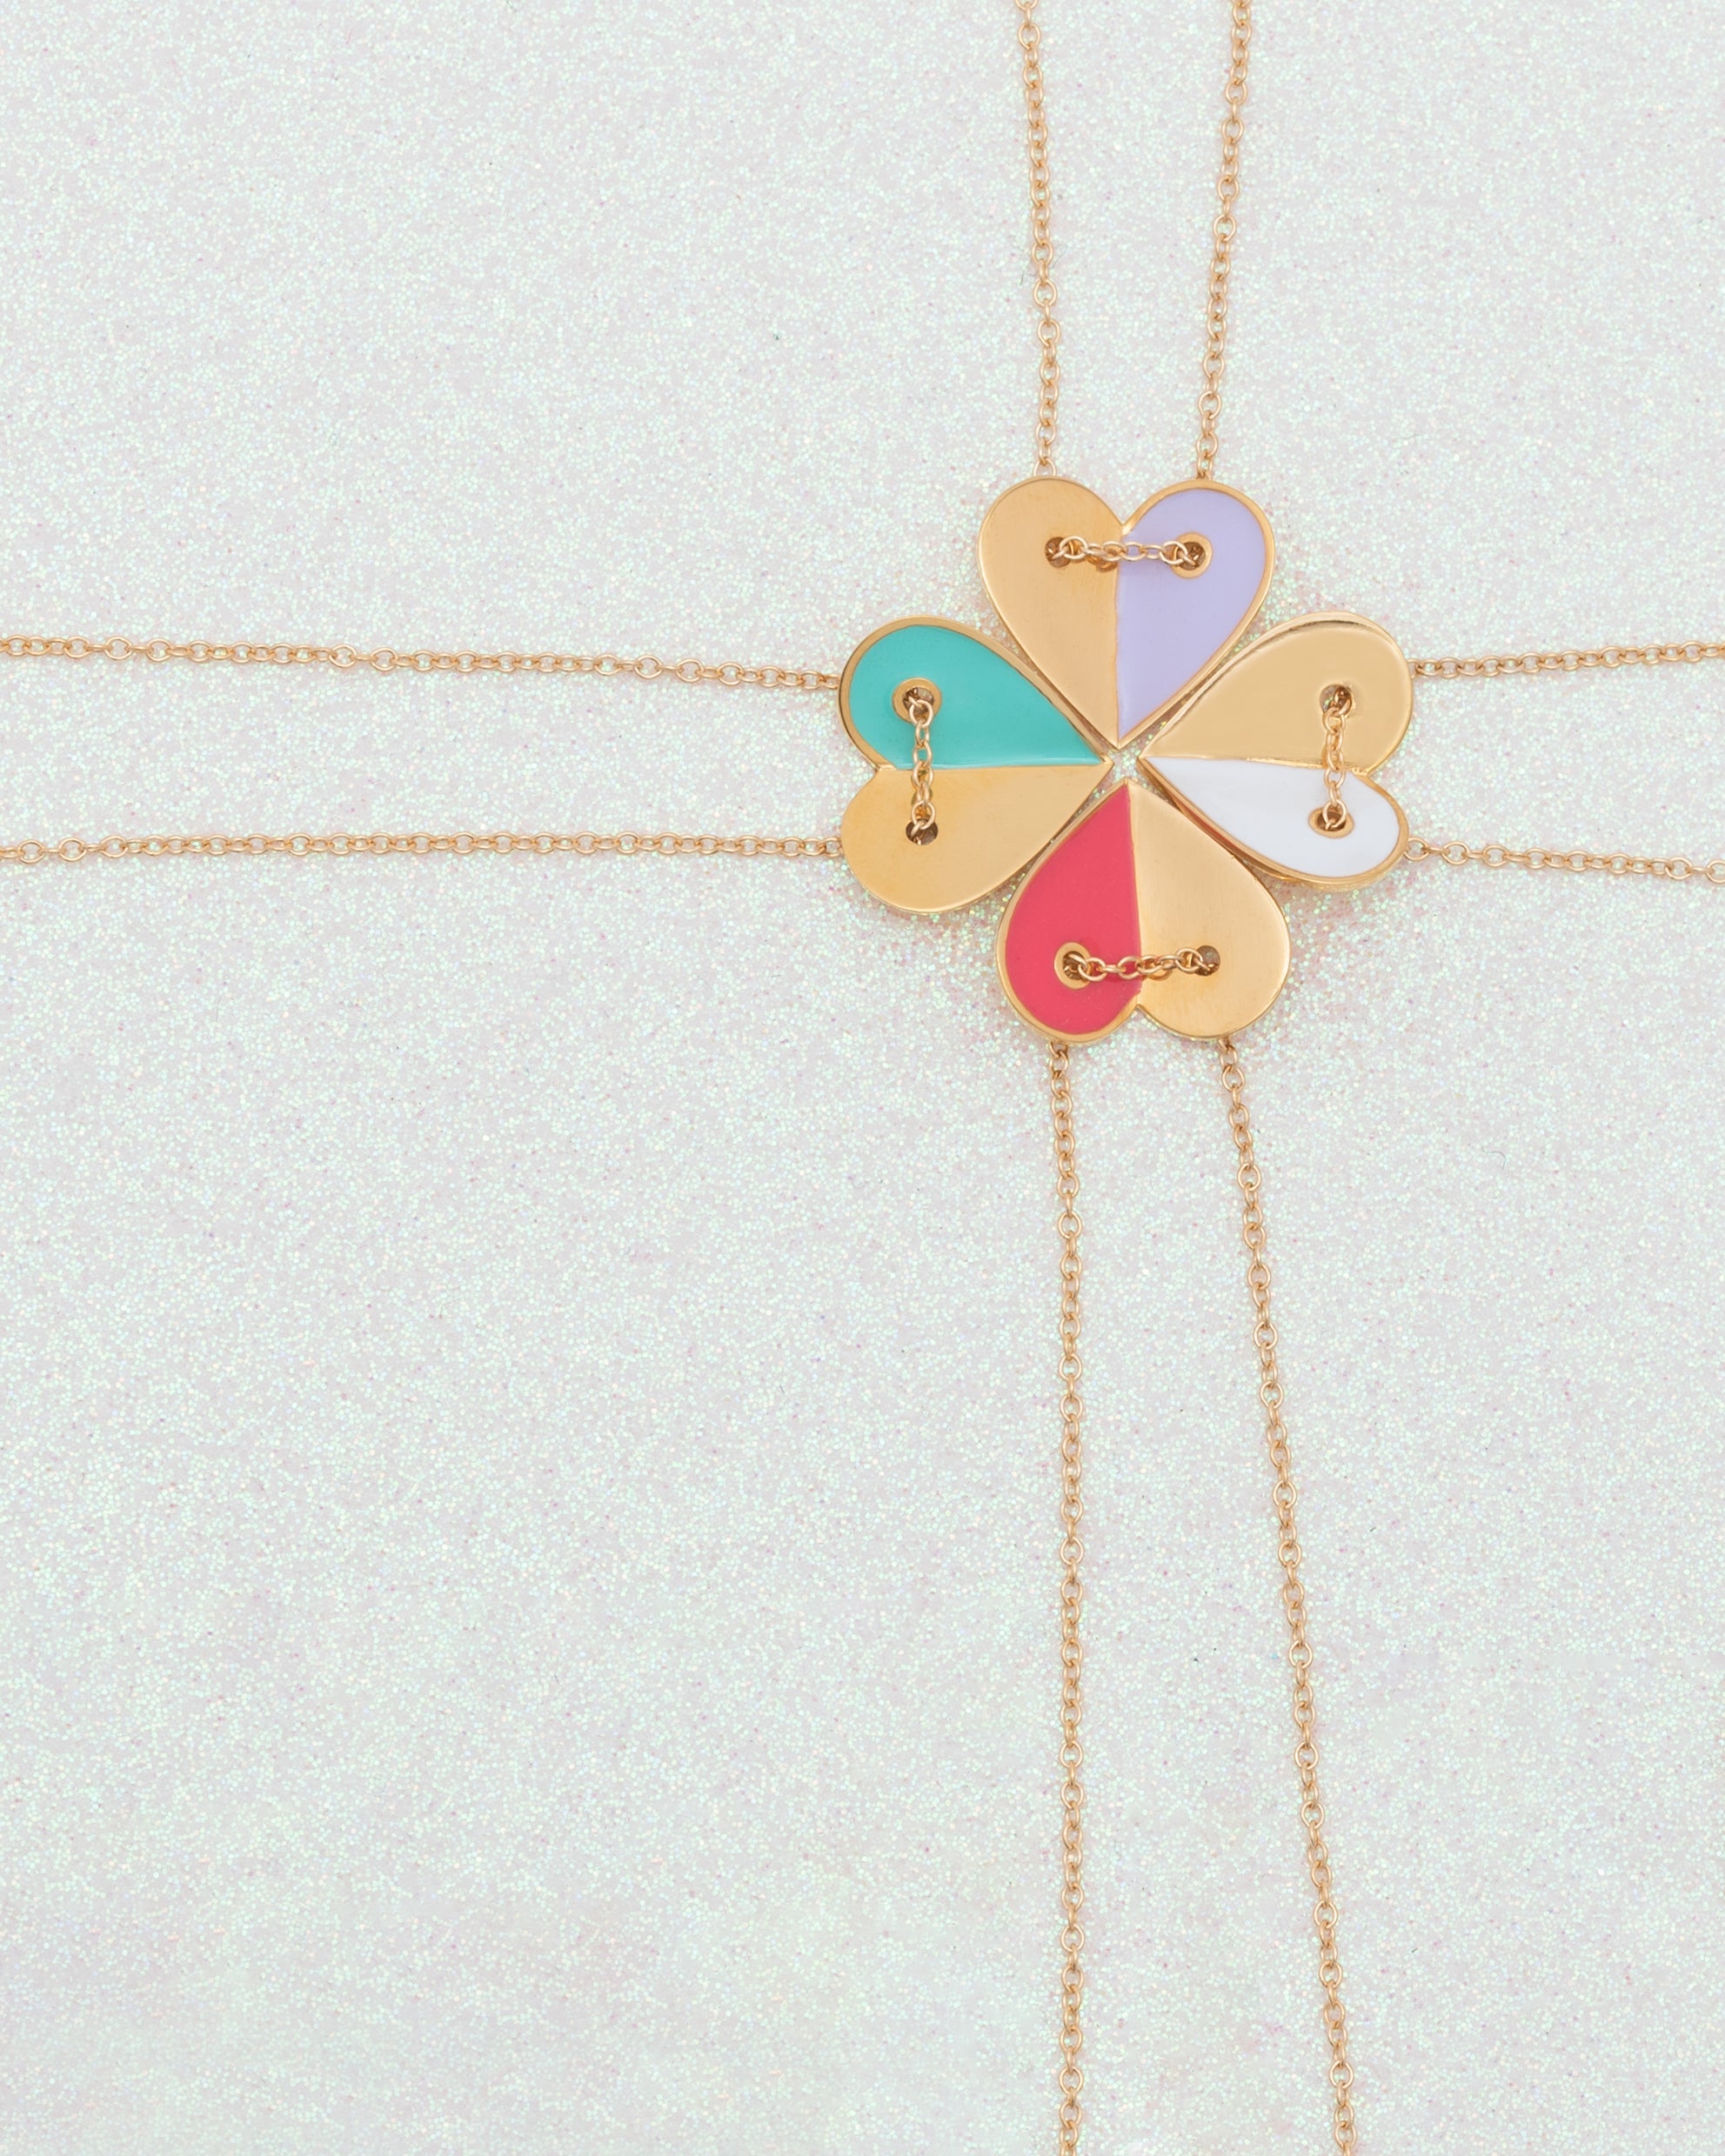 clover of happy heart necklaces